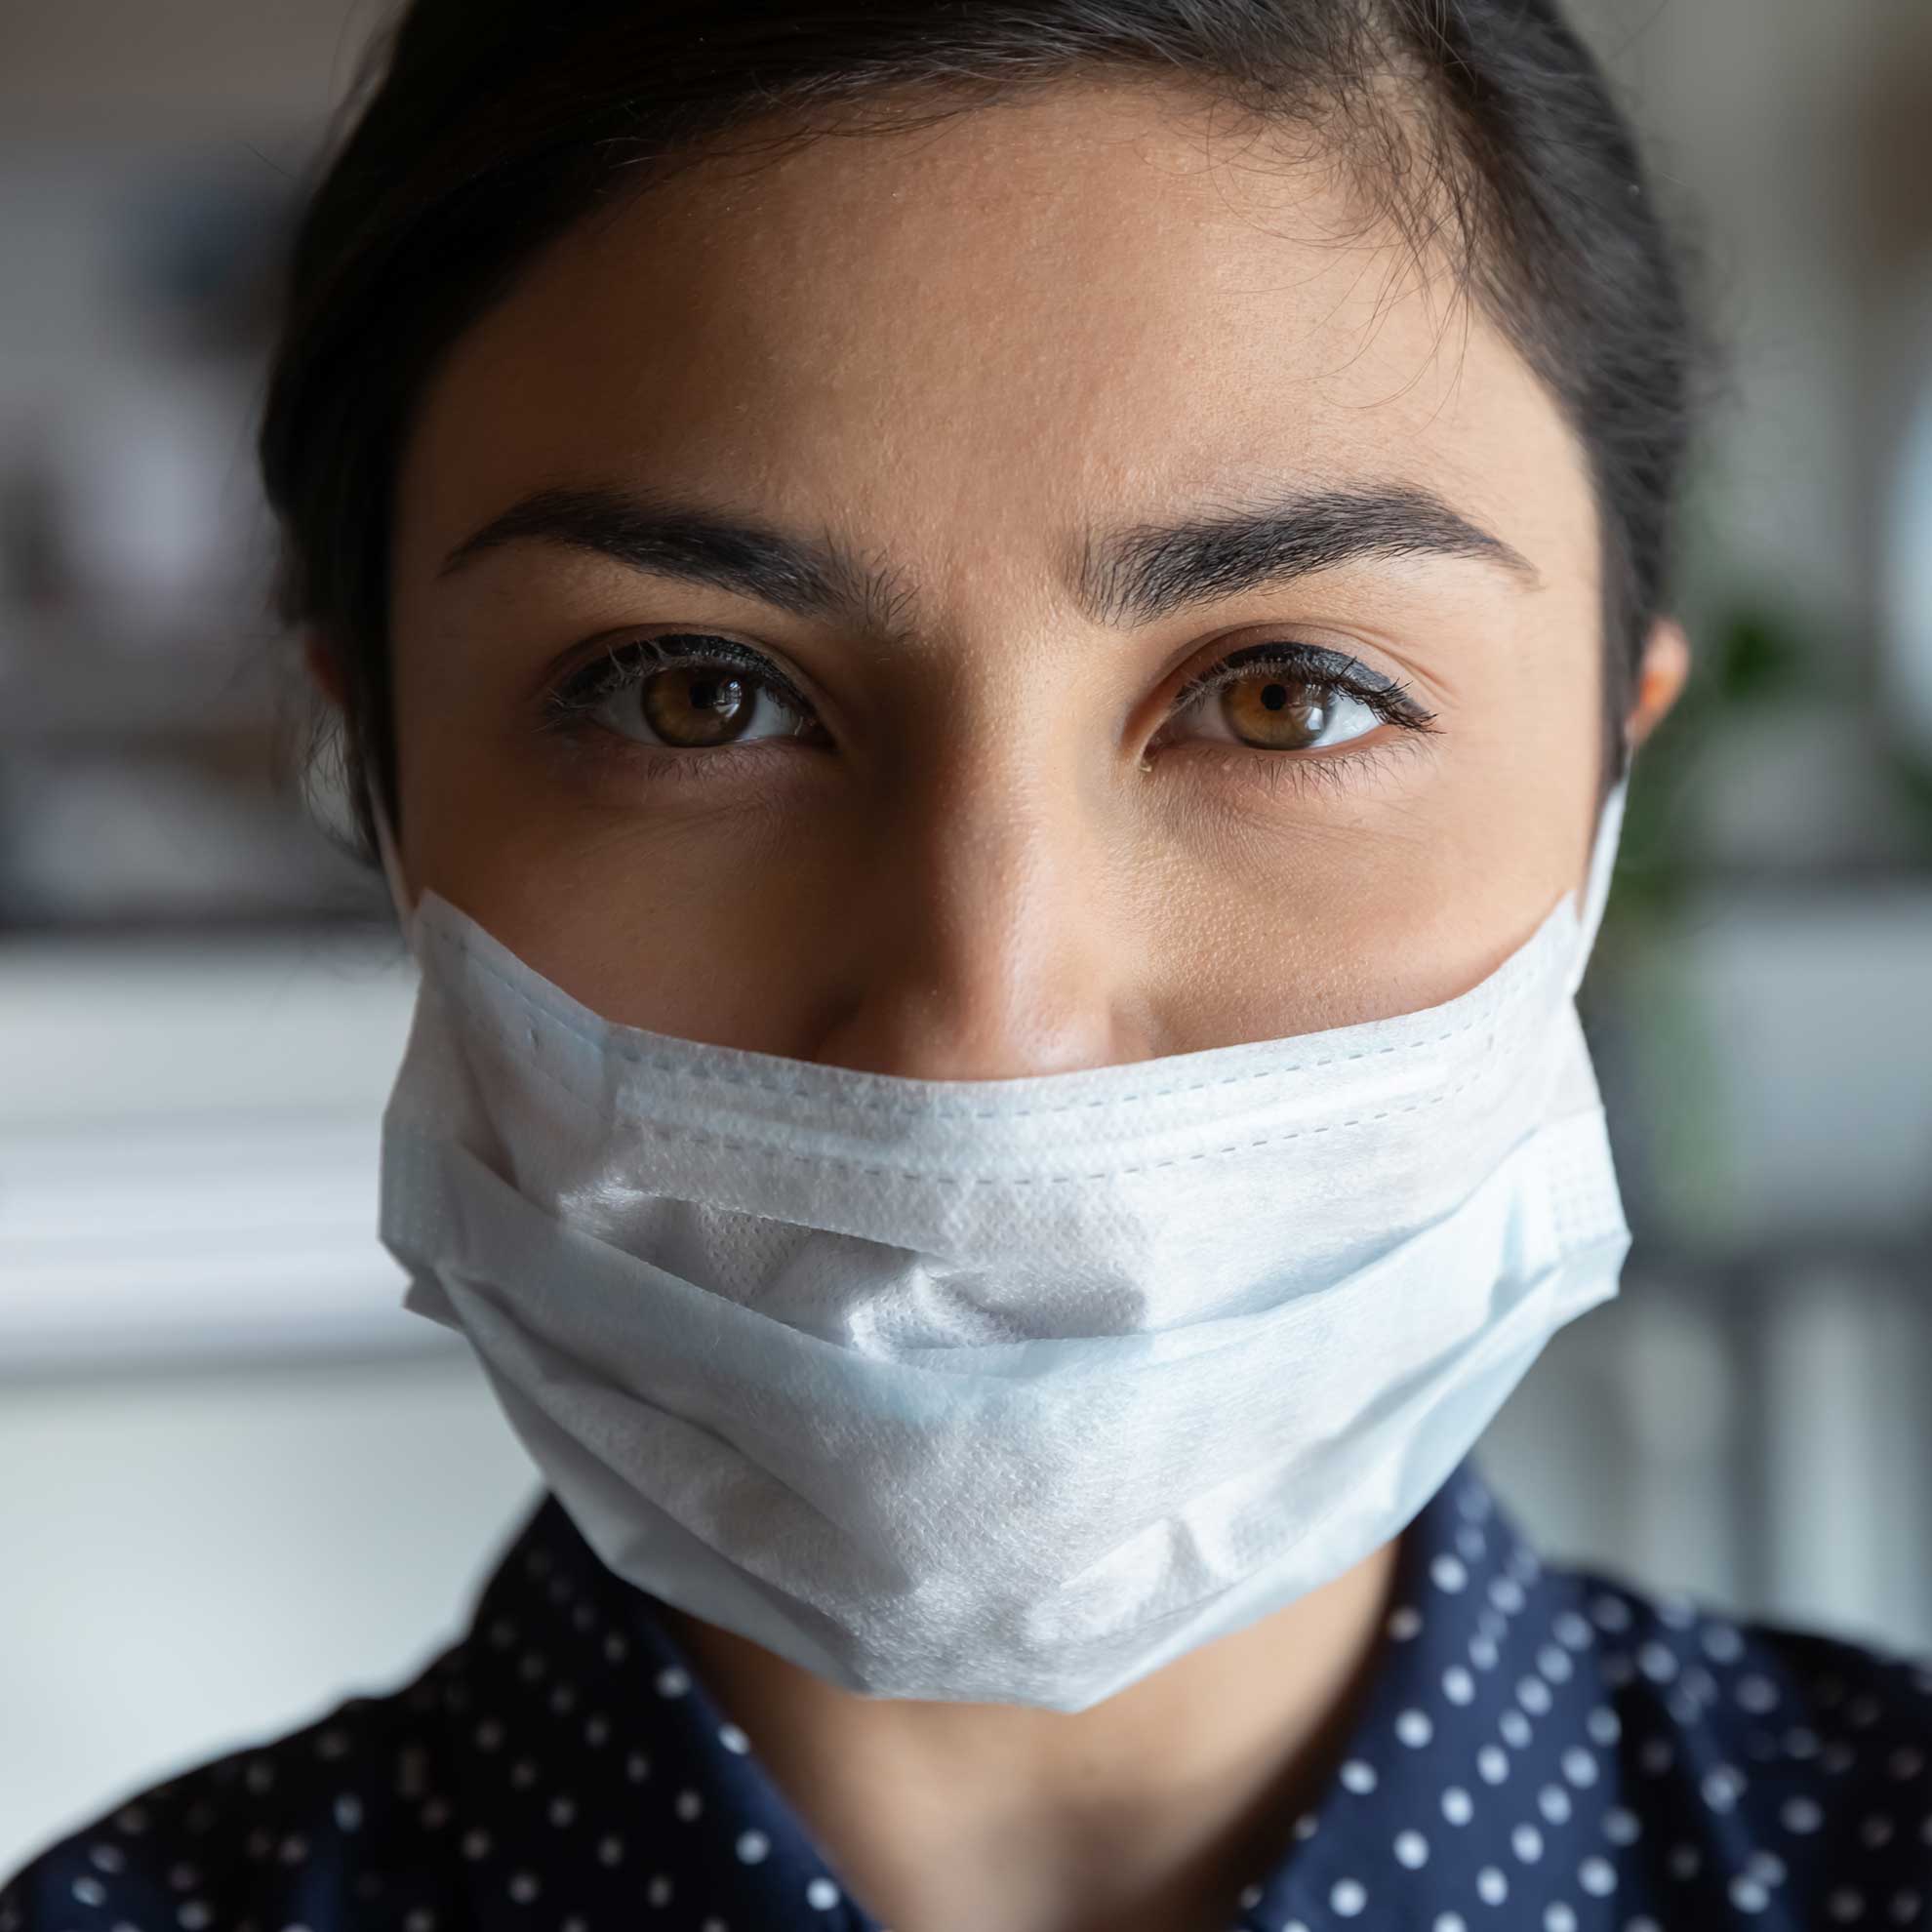 Lady wearing facemask due to covid-19